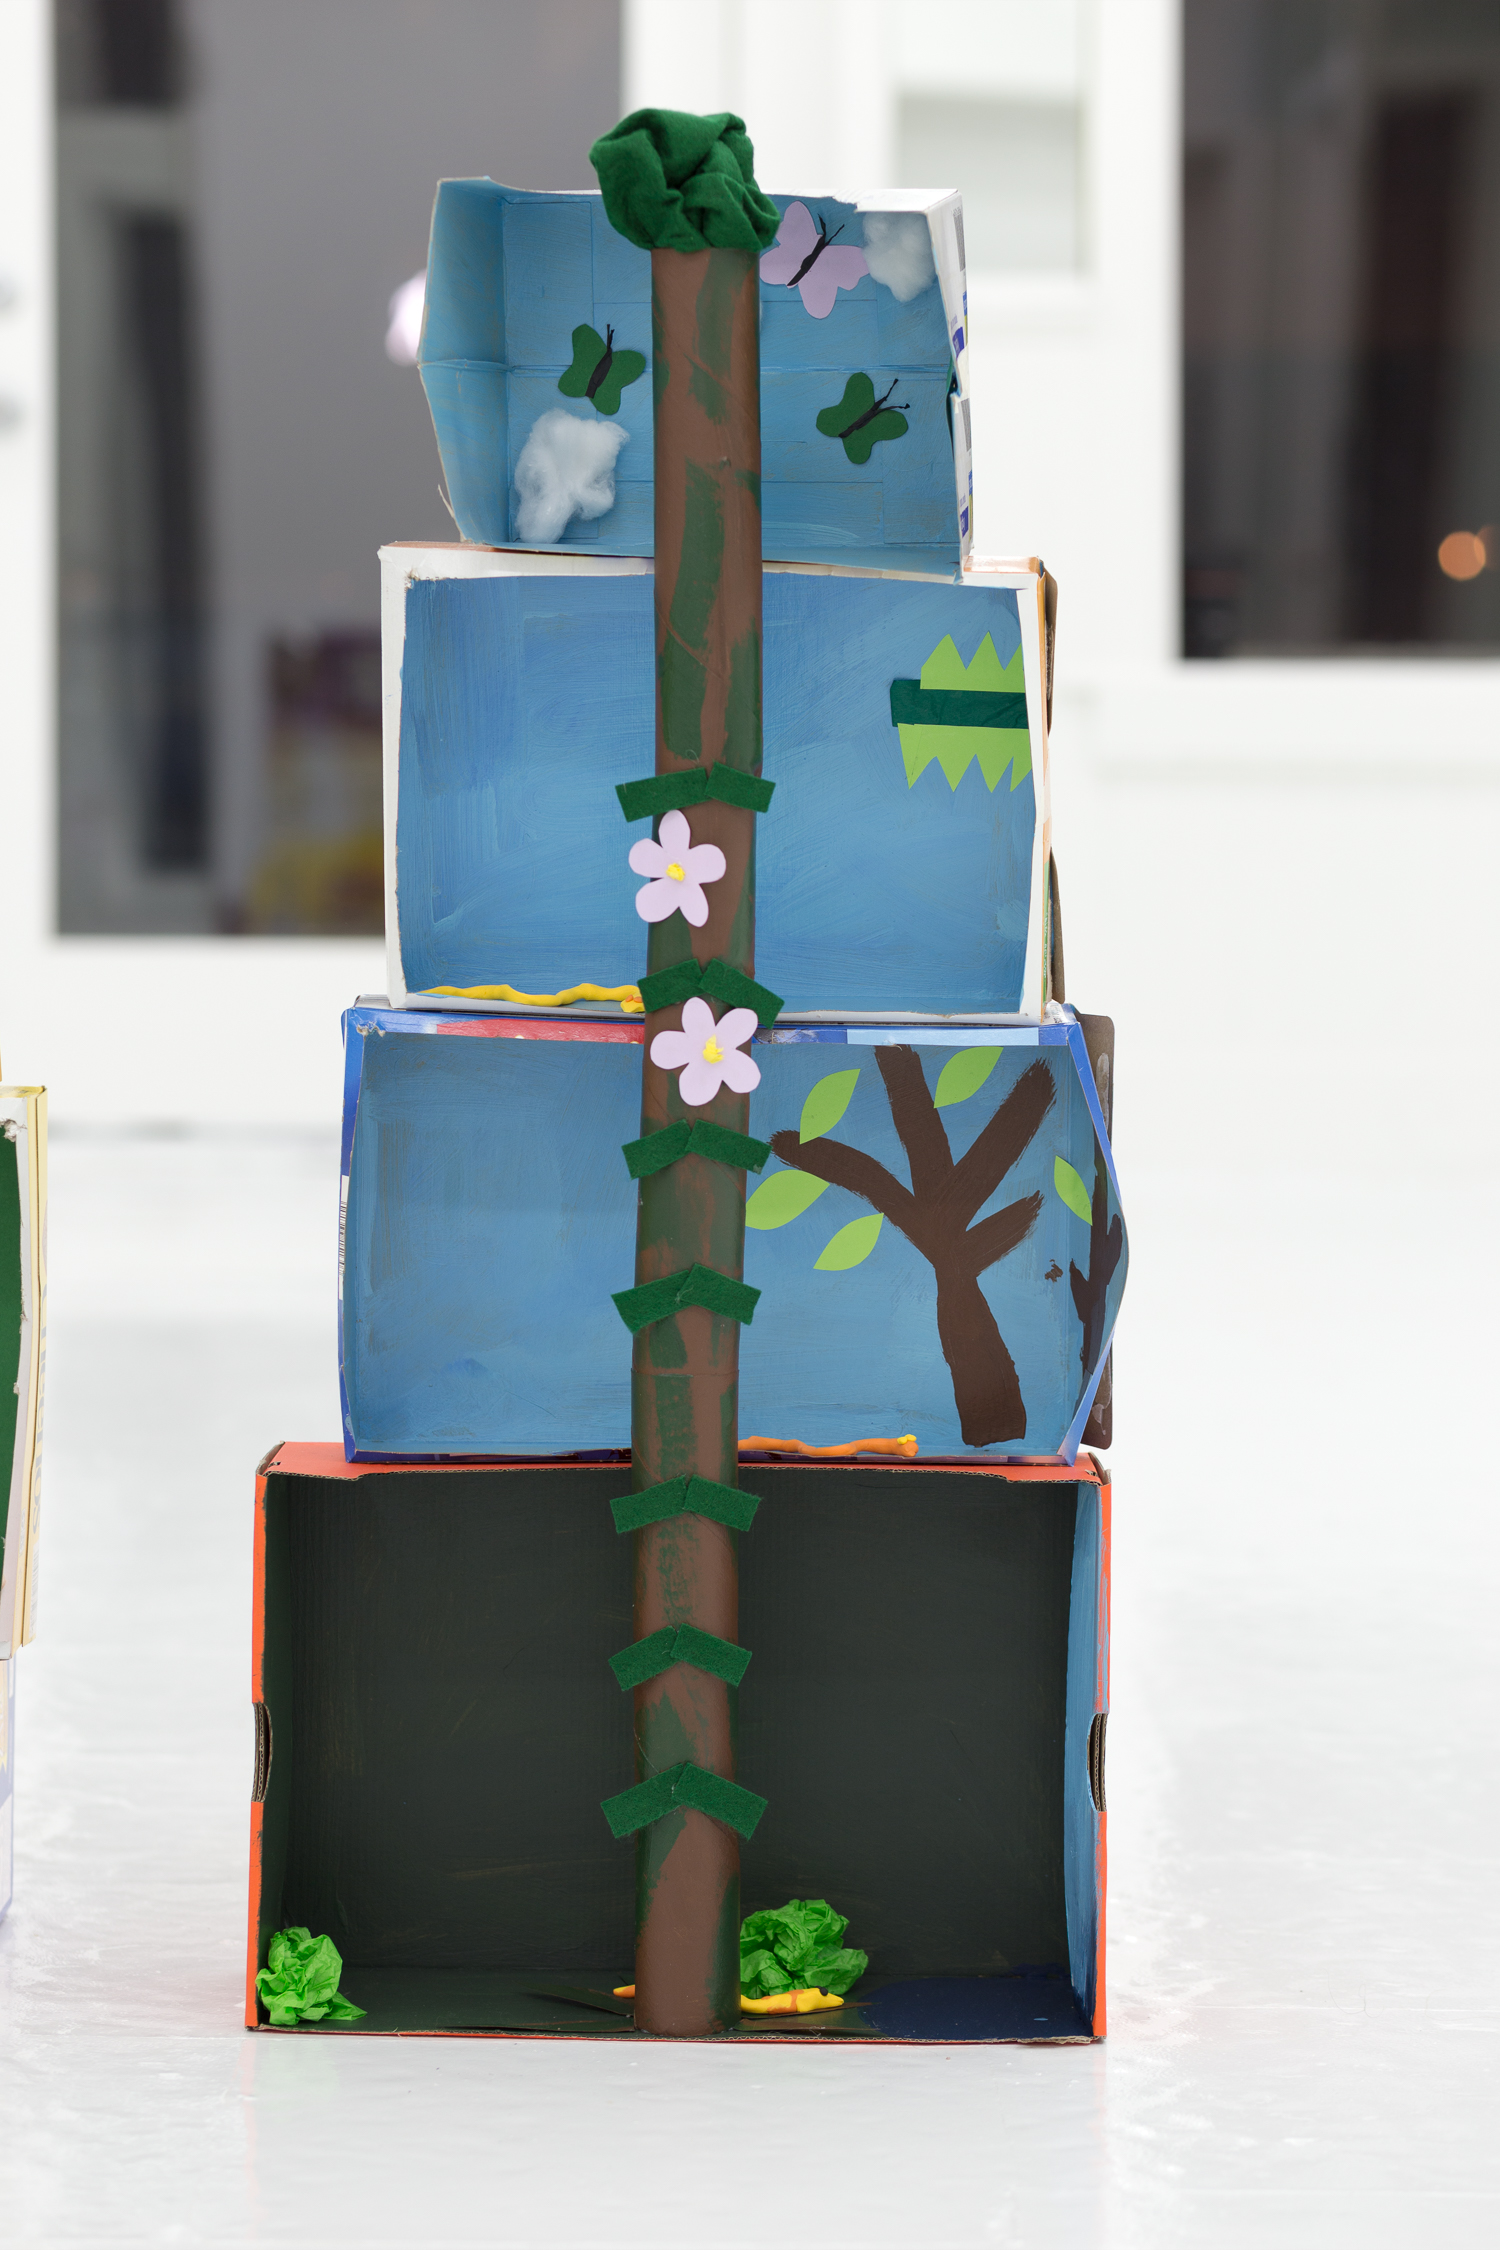 Rainforest diorama made of stacked boxes, toilet paper tubes, and crepe paper